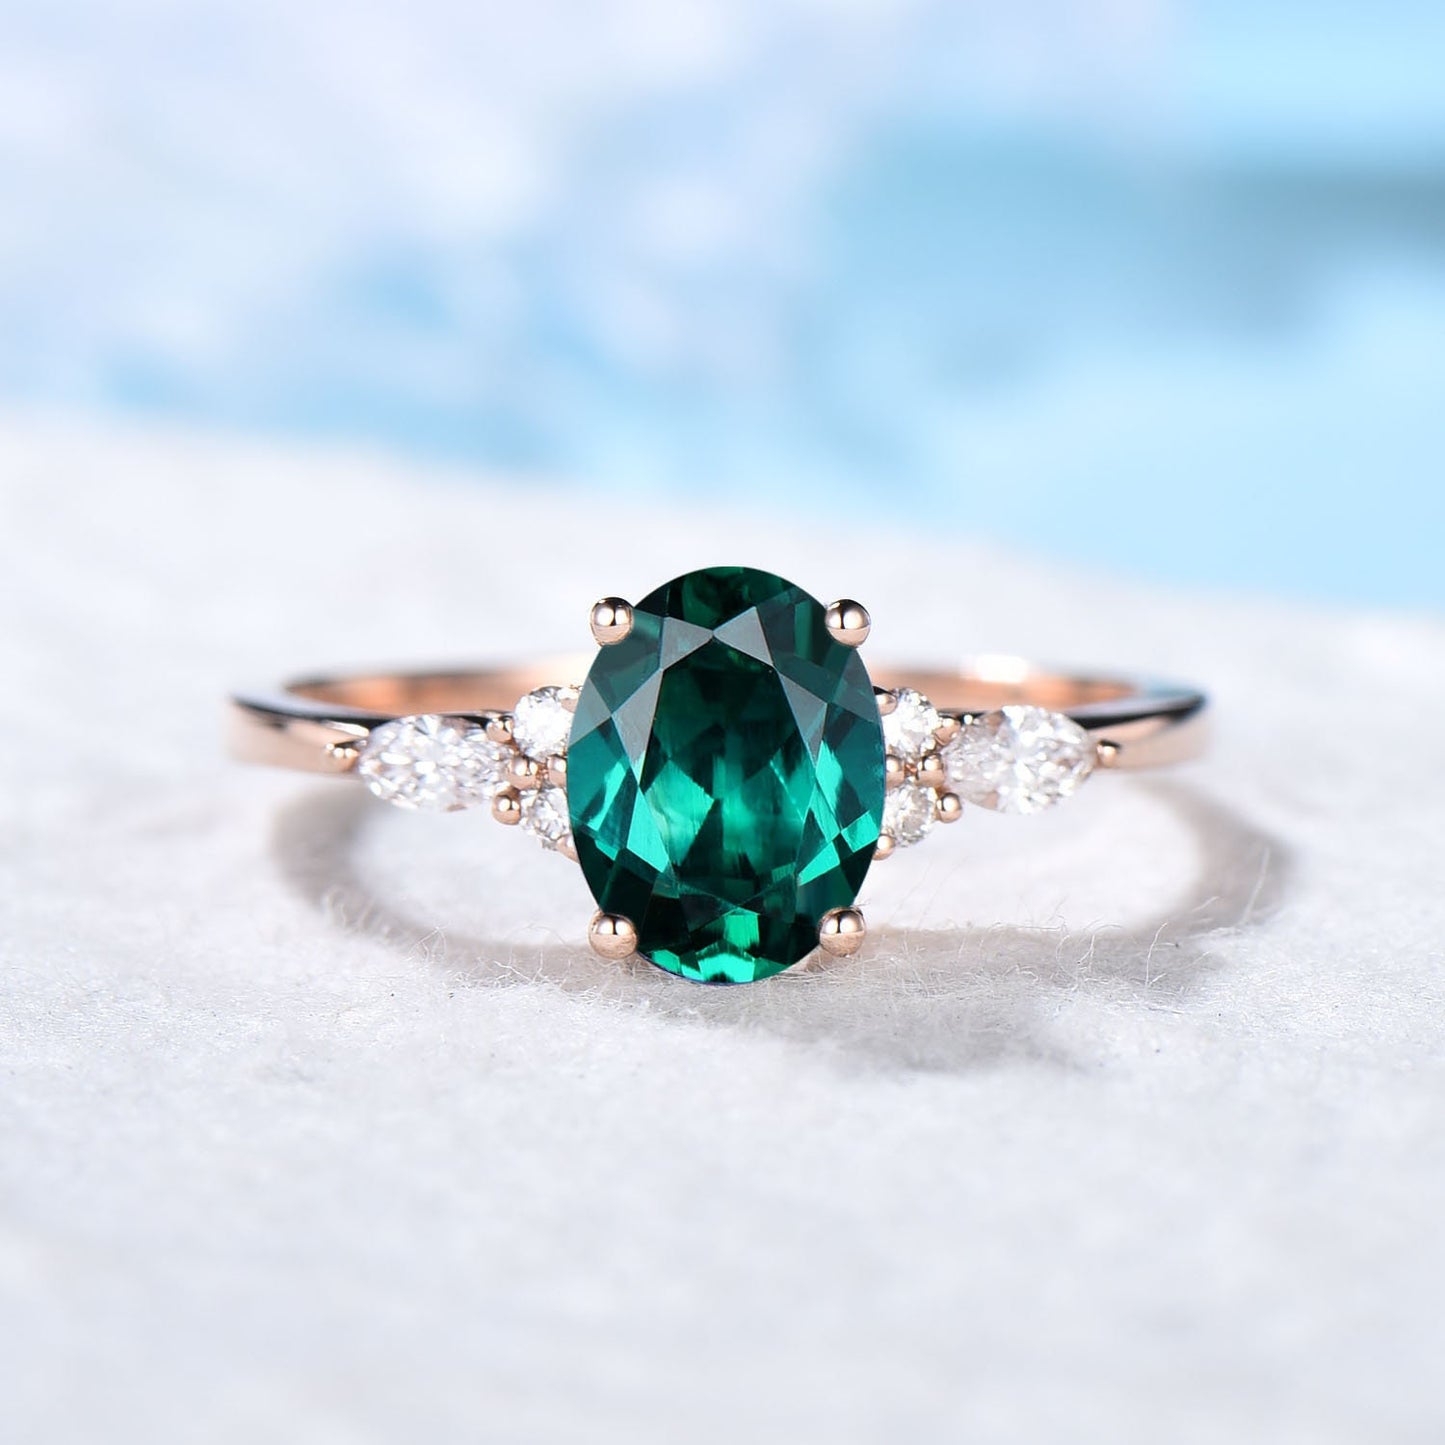 Cluster Emerald Ring-Sterling Silver Ring-Green Gemstone Ring-Oval Emerald Engagement Ring May Birthstone Ring-Anniversary Gift Woman Wife